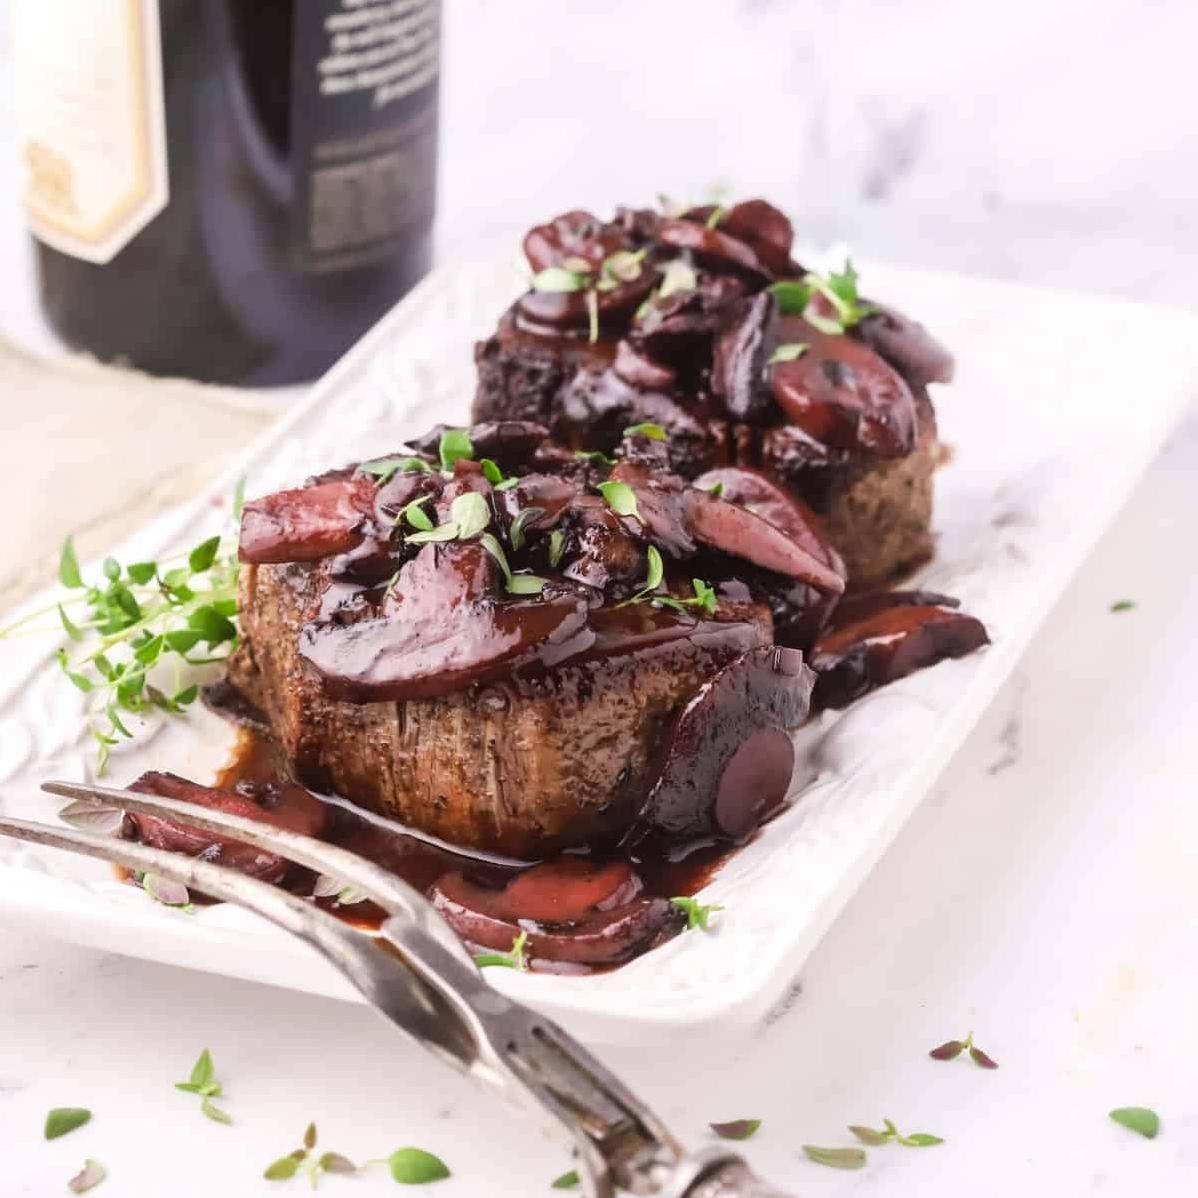  The combination of tender steak and savory mushroom and red wine sauce is the perfect way to elevate any dinner party menu.